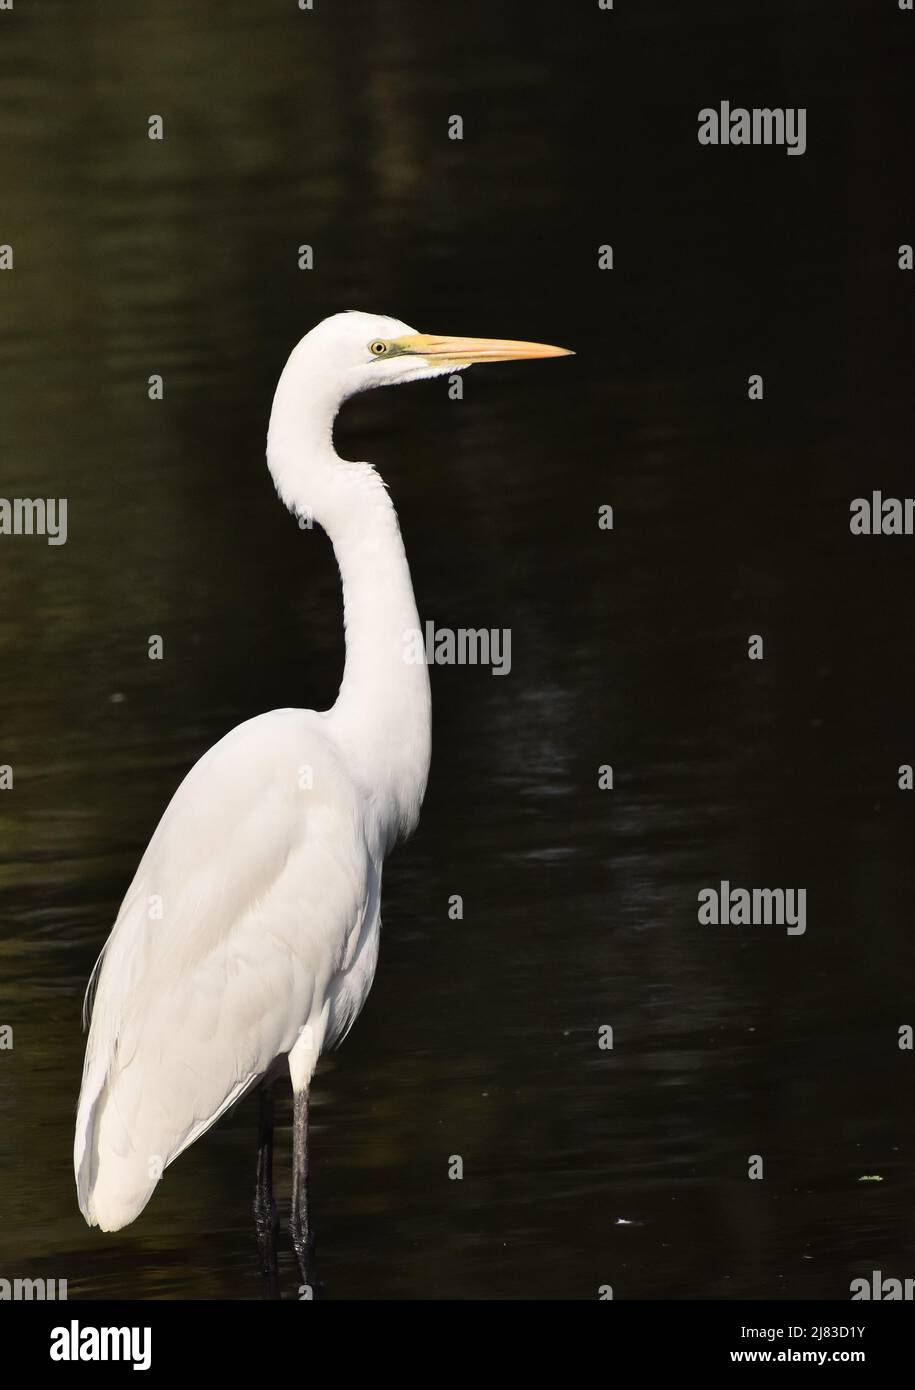 The great egret, Ardea albam, common egret, large egret, great white egret. great white heron, shot in early morning in India Stock Photo